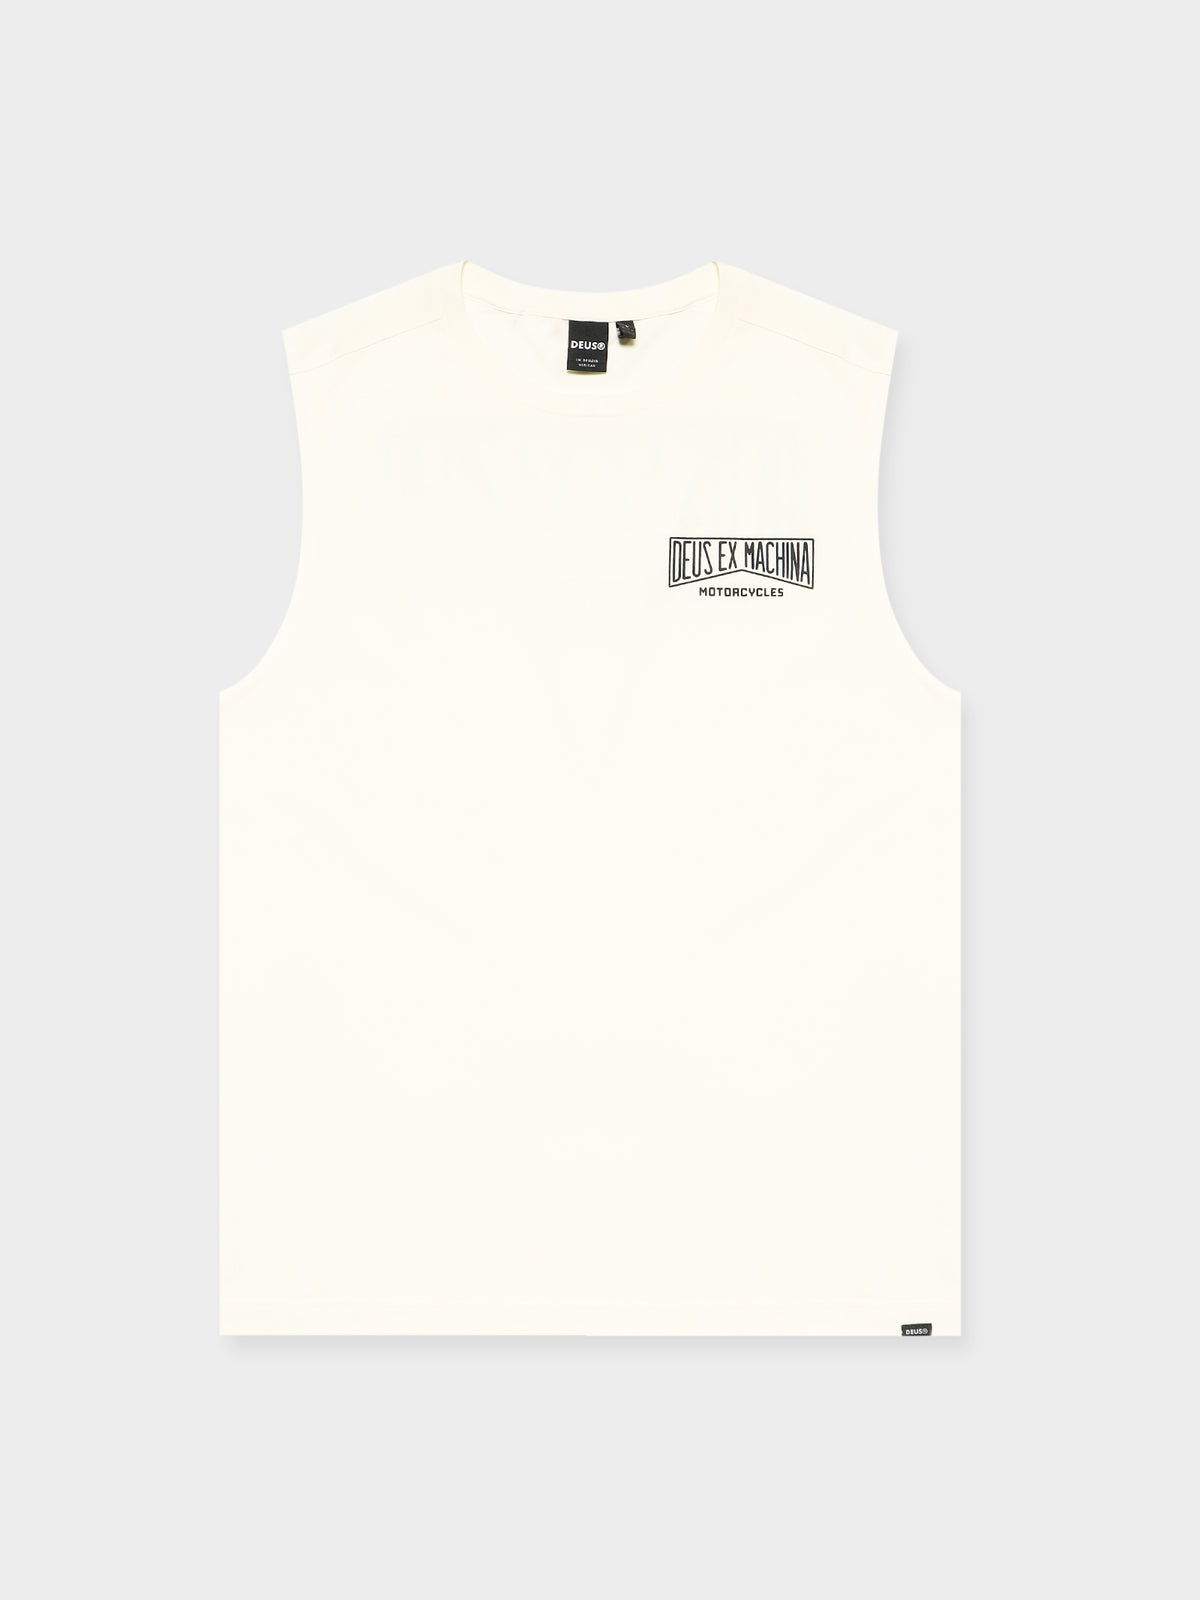 Leader Muscle Shirt in Vintage White